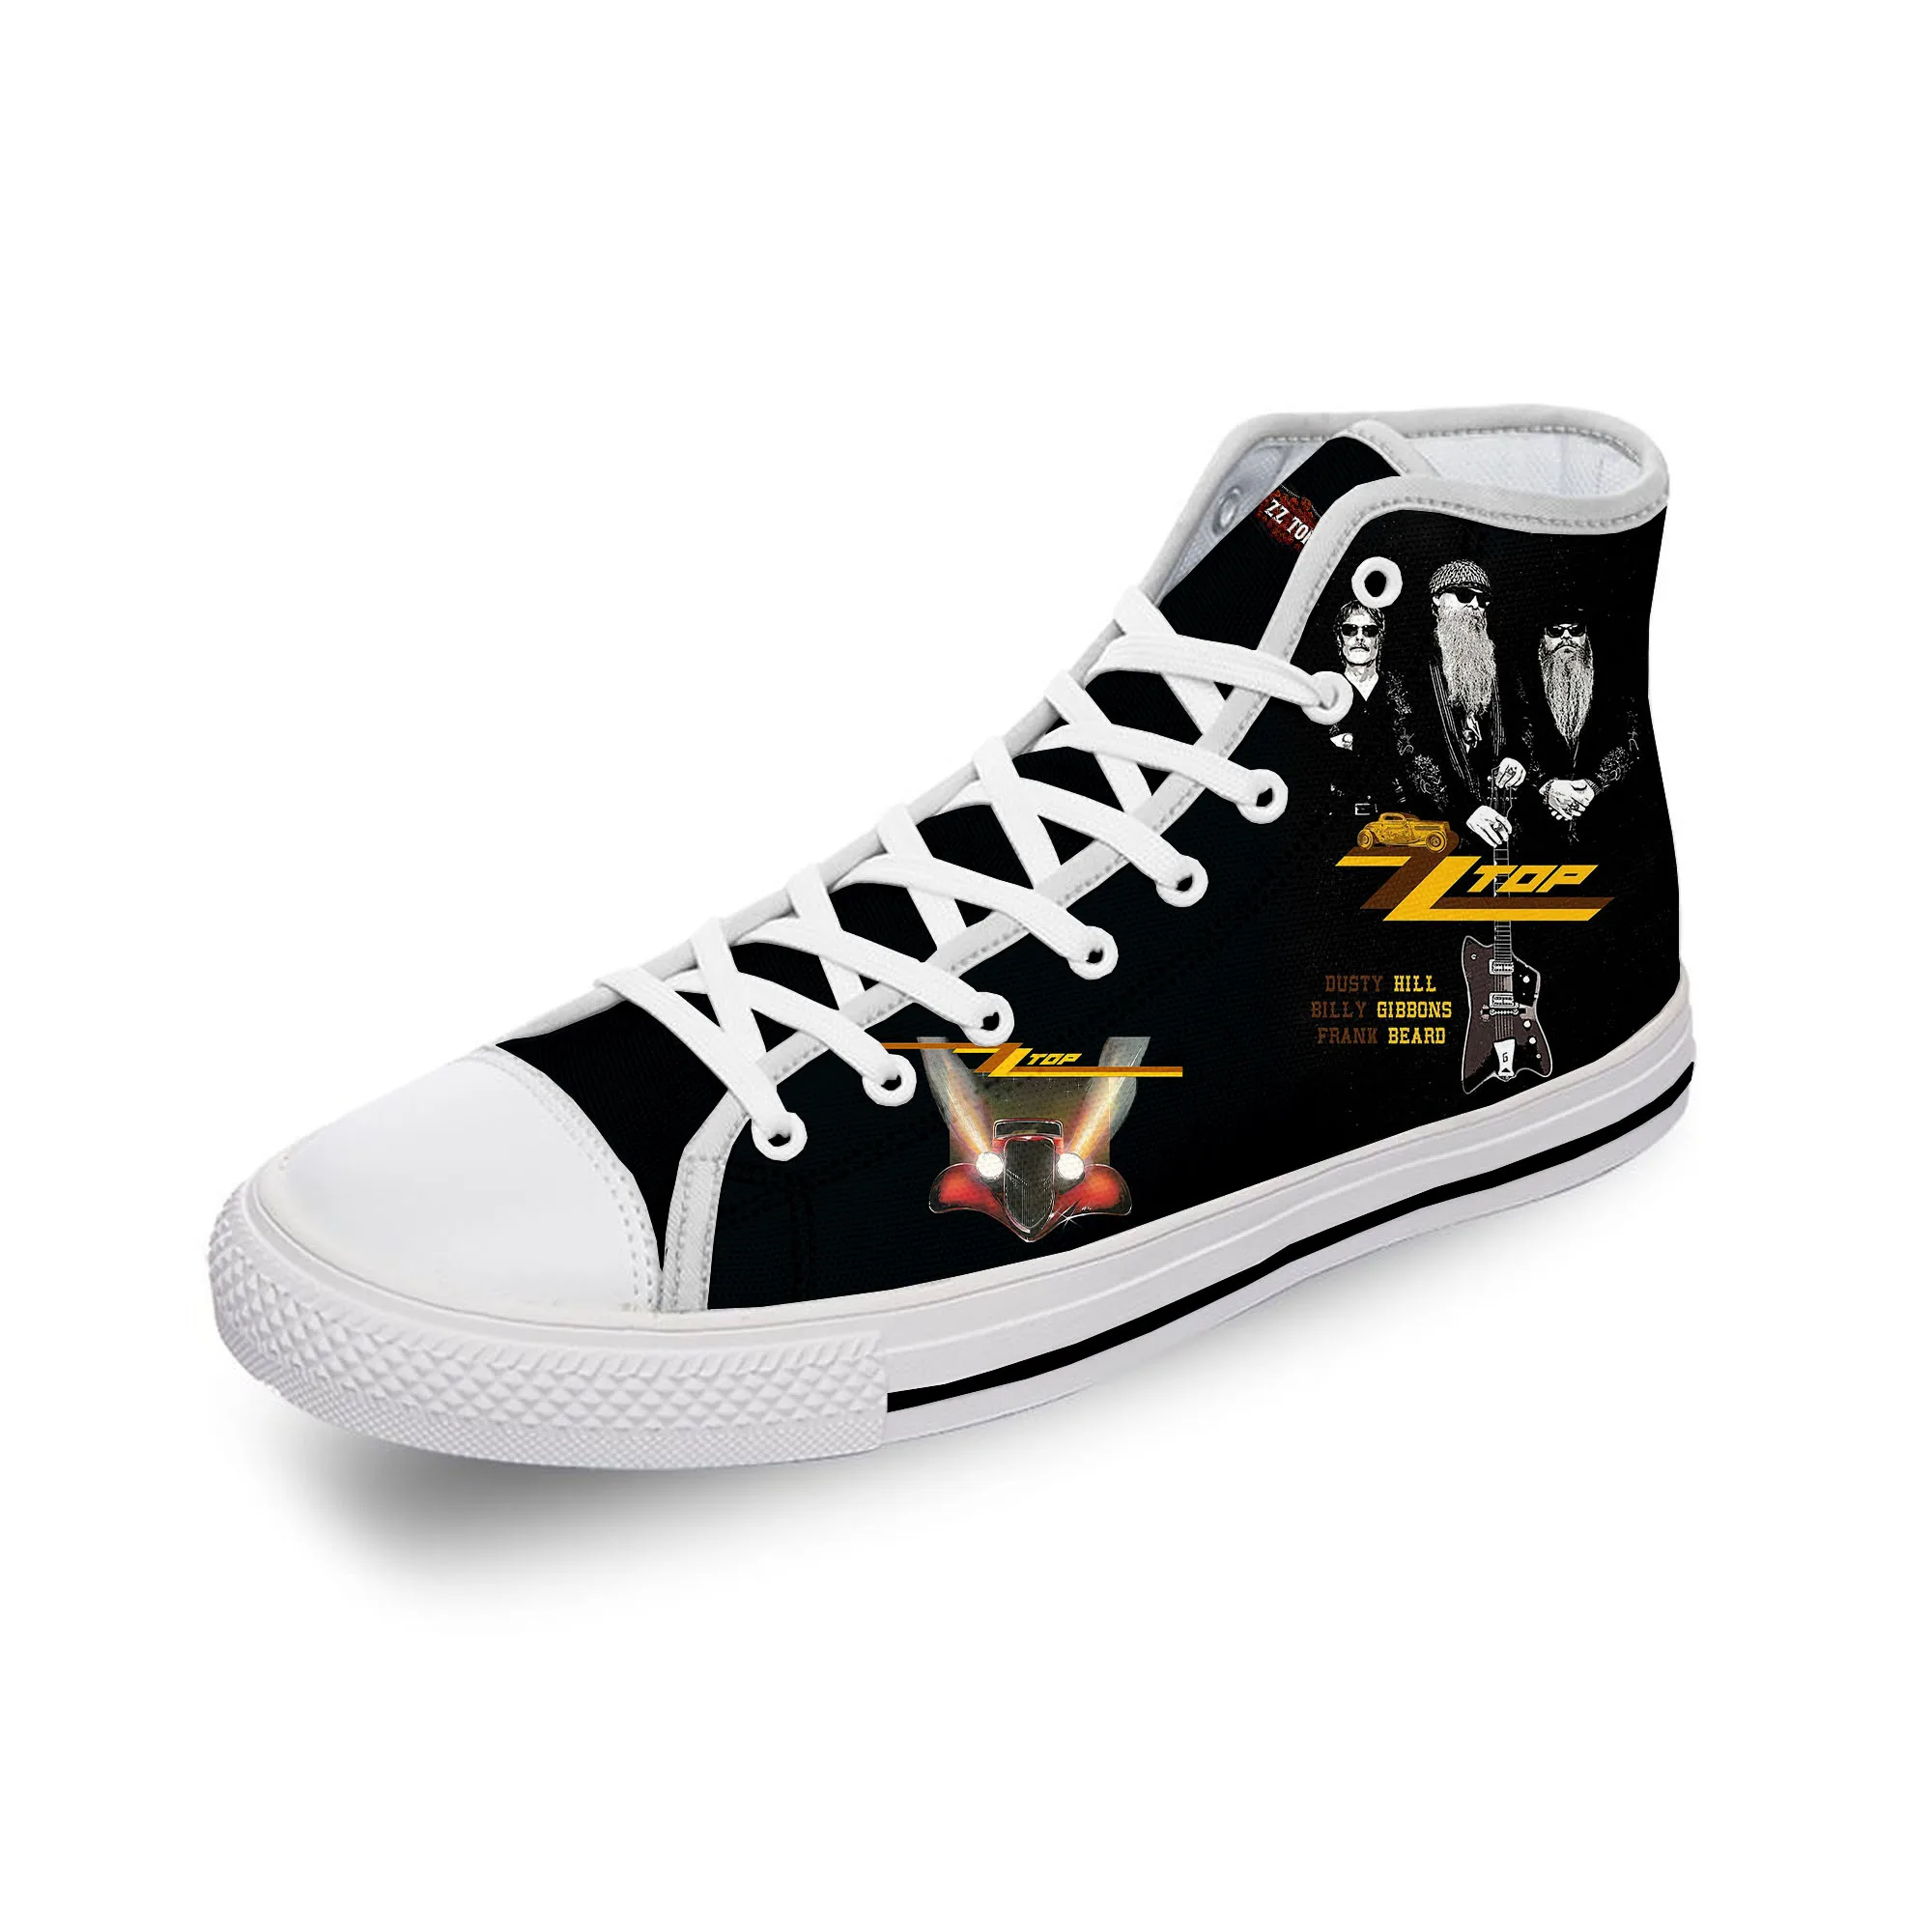 Top Blues Rock Band ZZ Singer Cool White Cloth Fashion 3D Print High Top Canvas Shoes Men Women Lightweight Breathable Sneakers